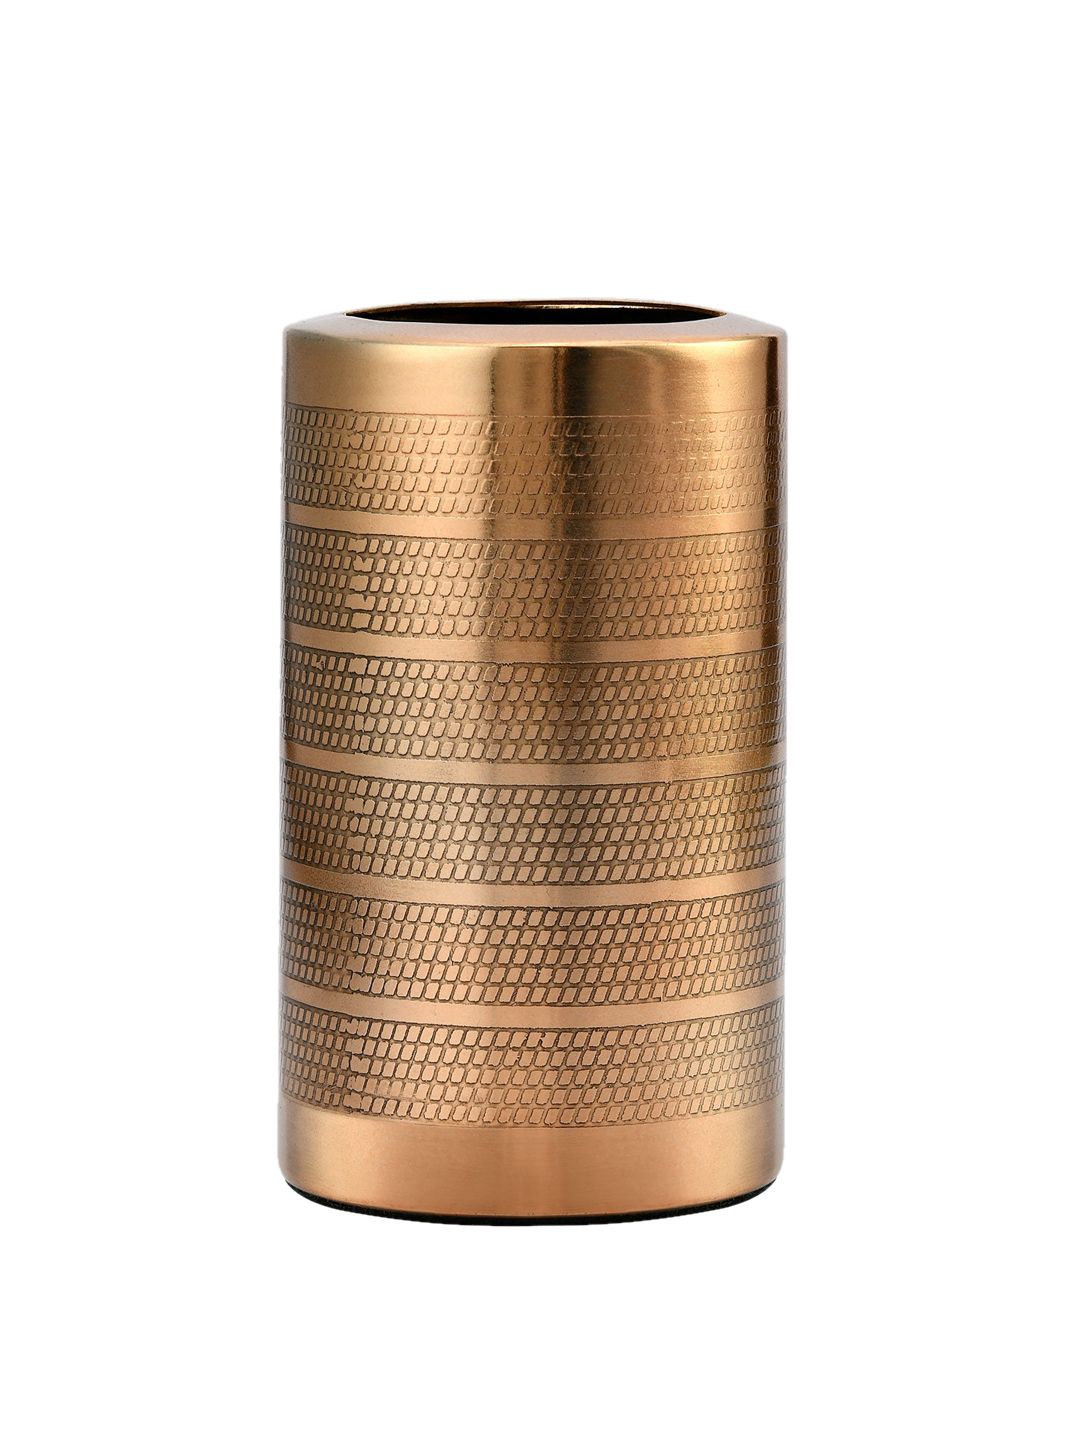 Athome by Nilkamal Gold-Toned Striped Metal Toothbrush Holder Price in India